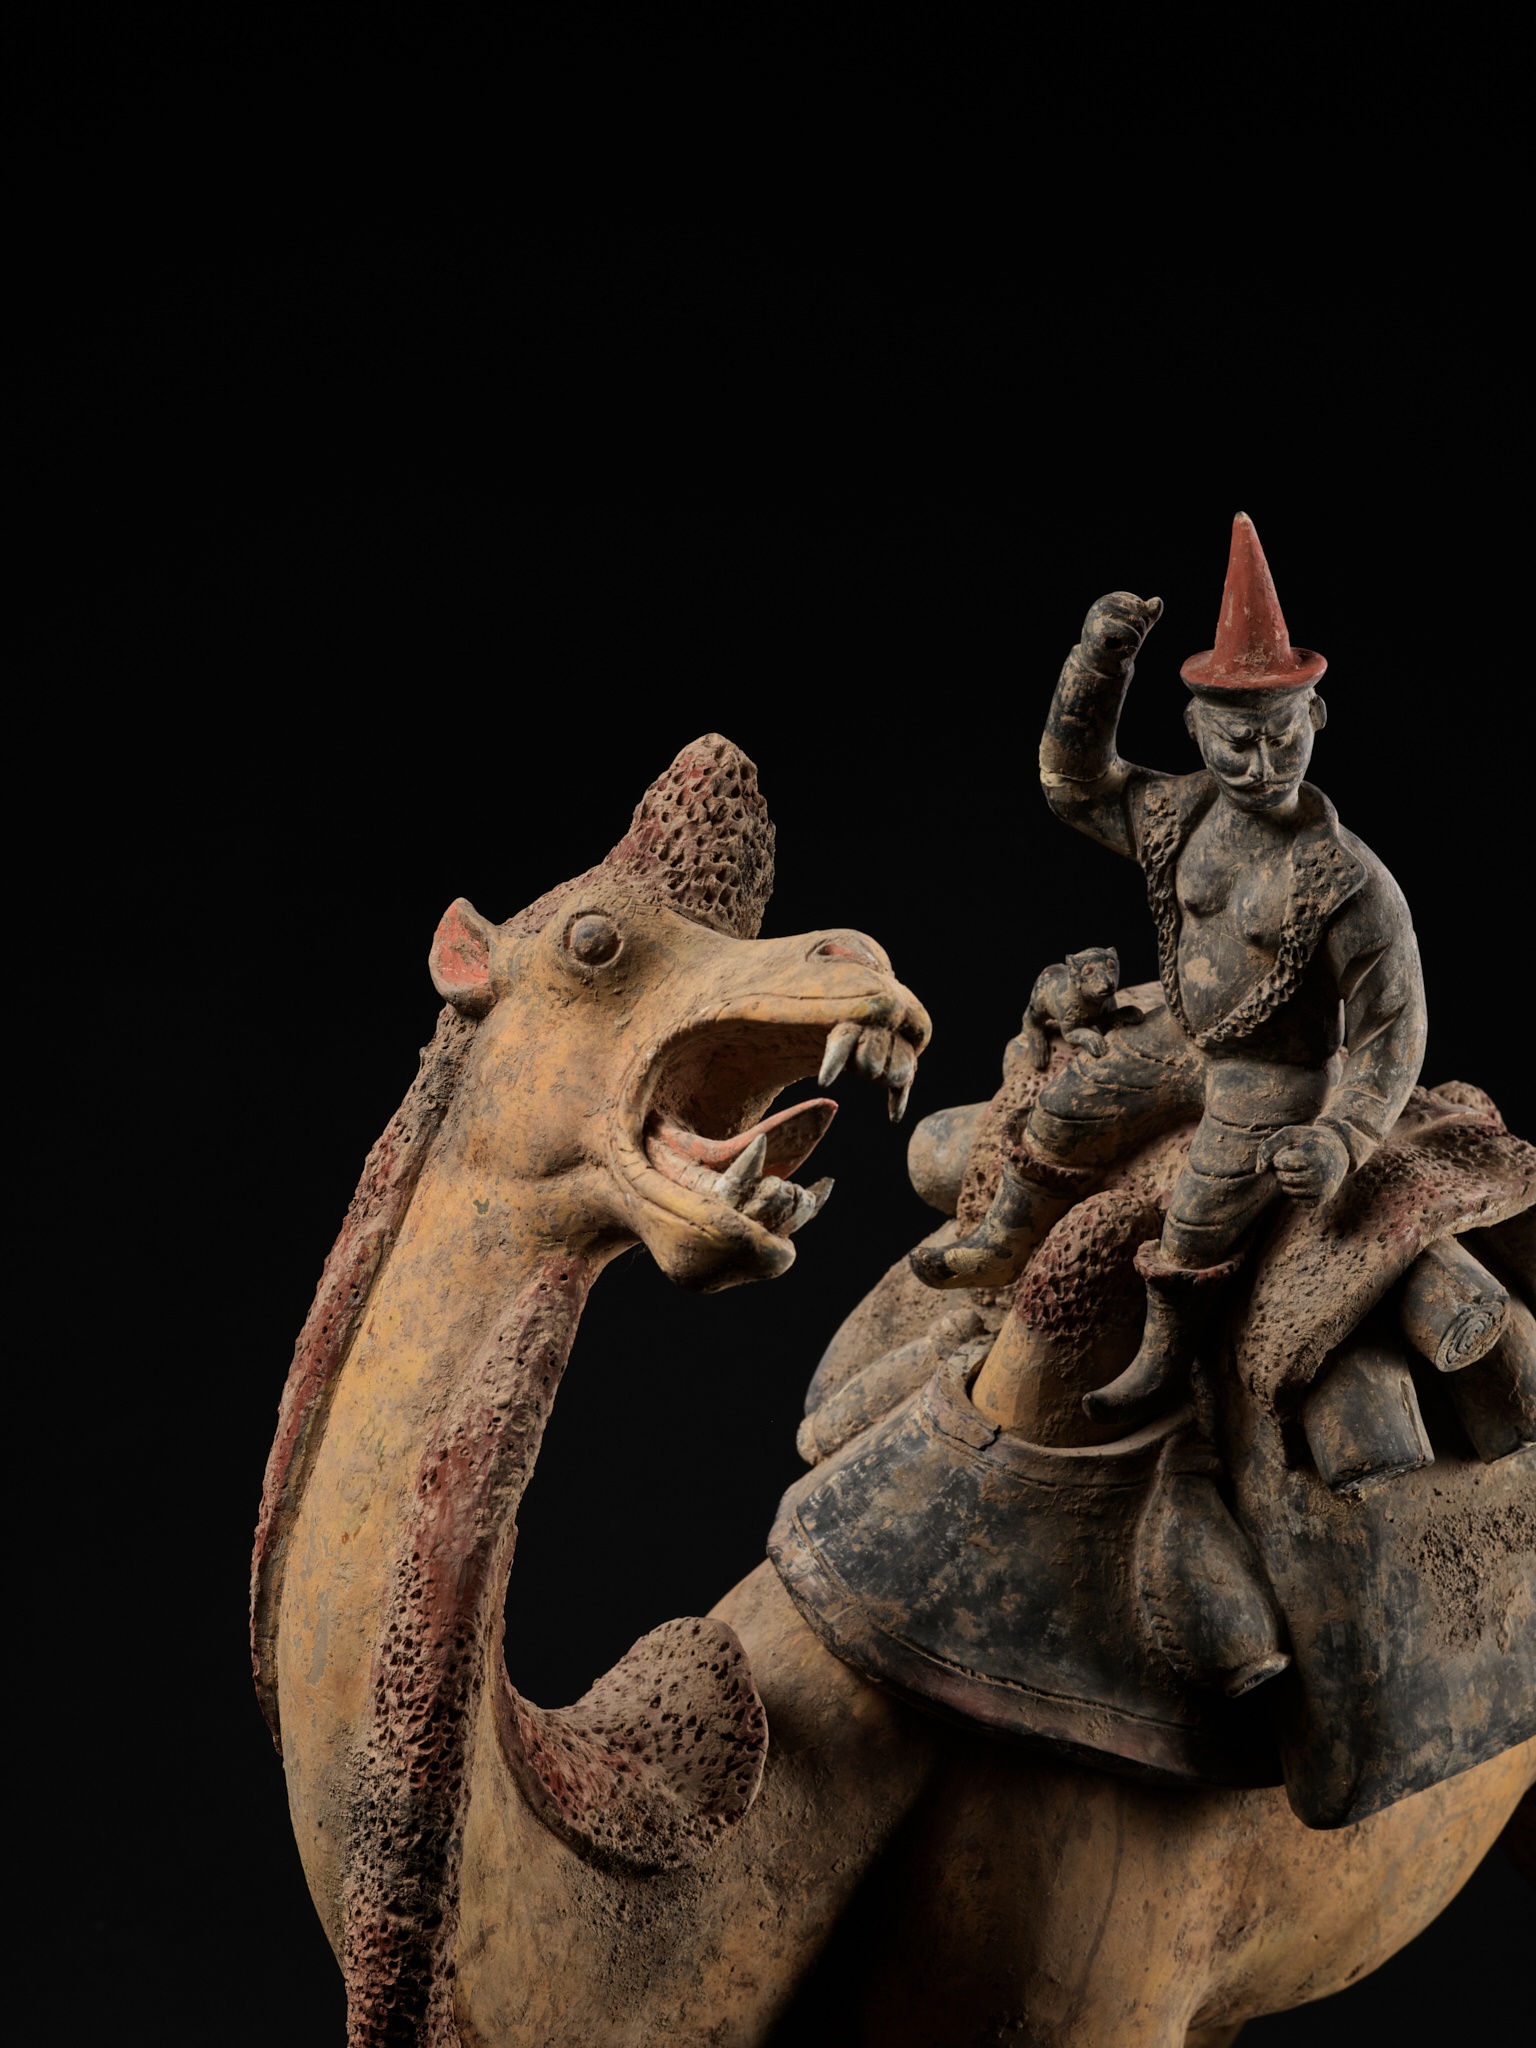 AN EXCEPTIONALLY LARGE PAINTED POTTERY FIGURE OF A BACTRIAN CAMEL AND A SOGDIAN RIDER, TANG DYNASTY - Image 10 of 12